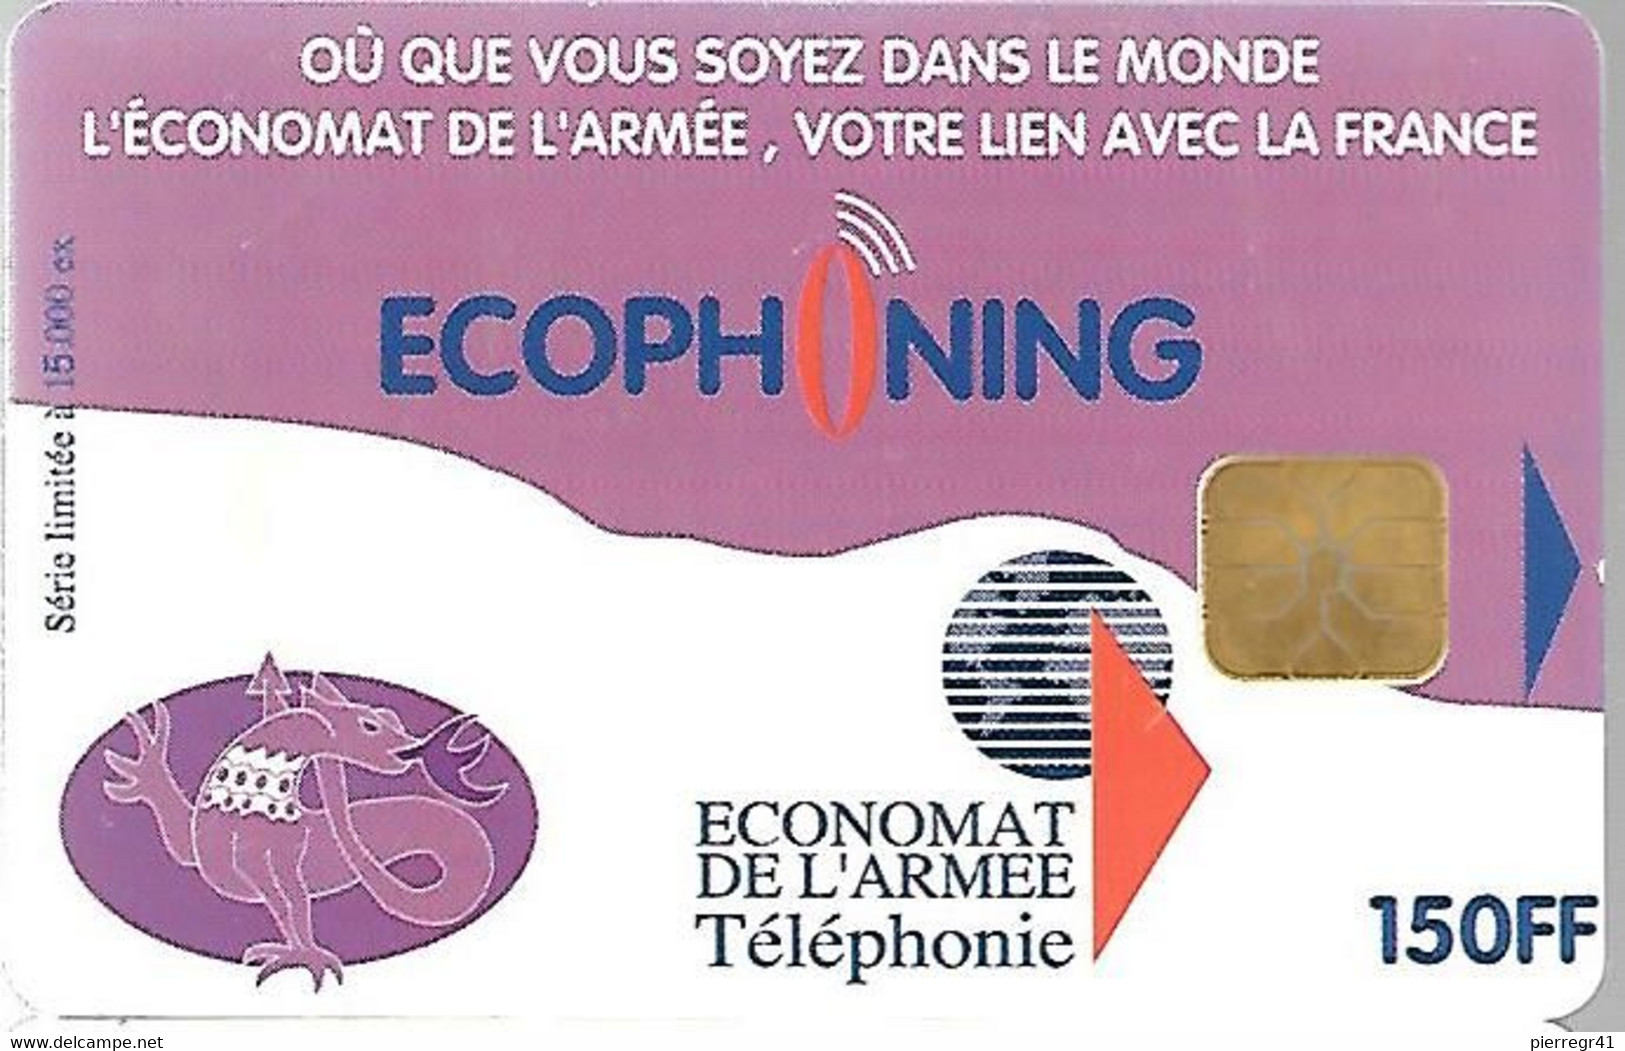 CARTE-PUCE-MILITAIRE- ECOPHONING-SFOR 11-150FF-V°ARMEE De TERRE-15000Ex-VIOLETTE-BE - - Military Phonecards